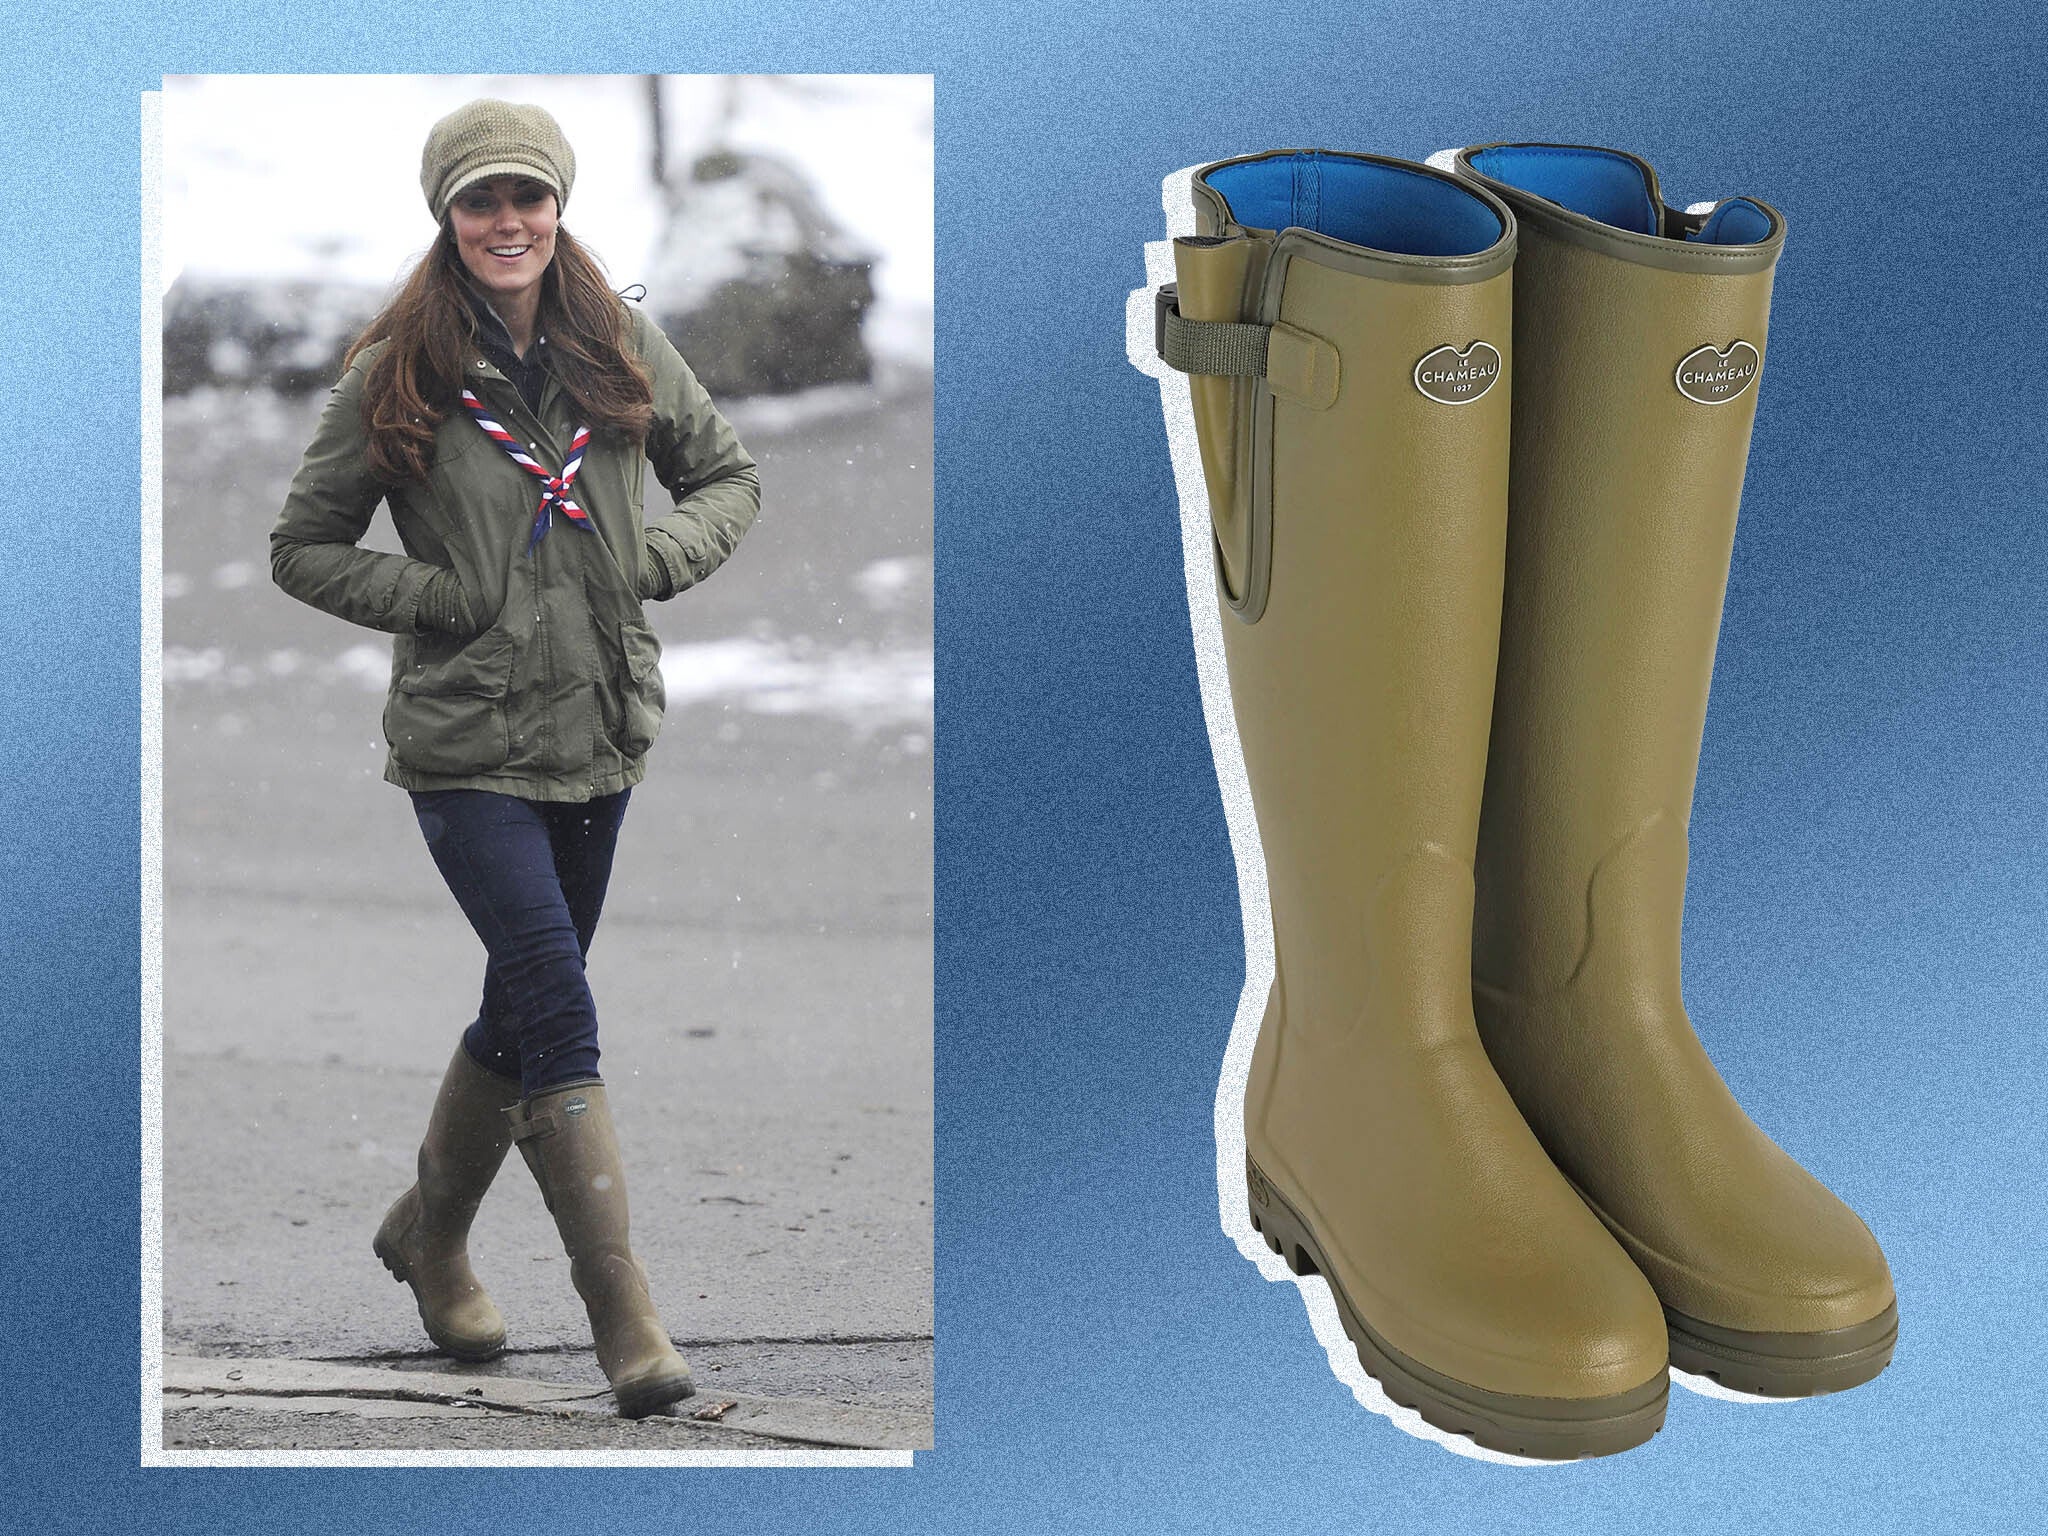 Le Chameau wellies review: Are Kate Middleton's favourite boots worth £200?